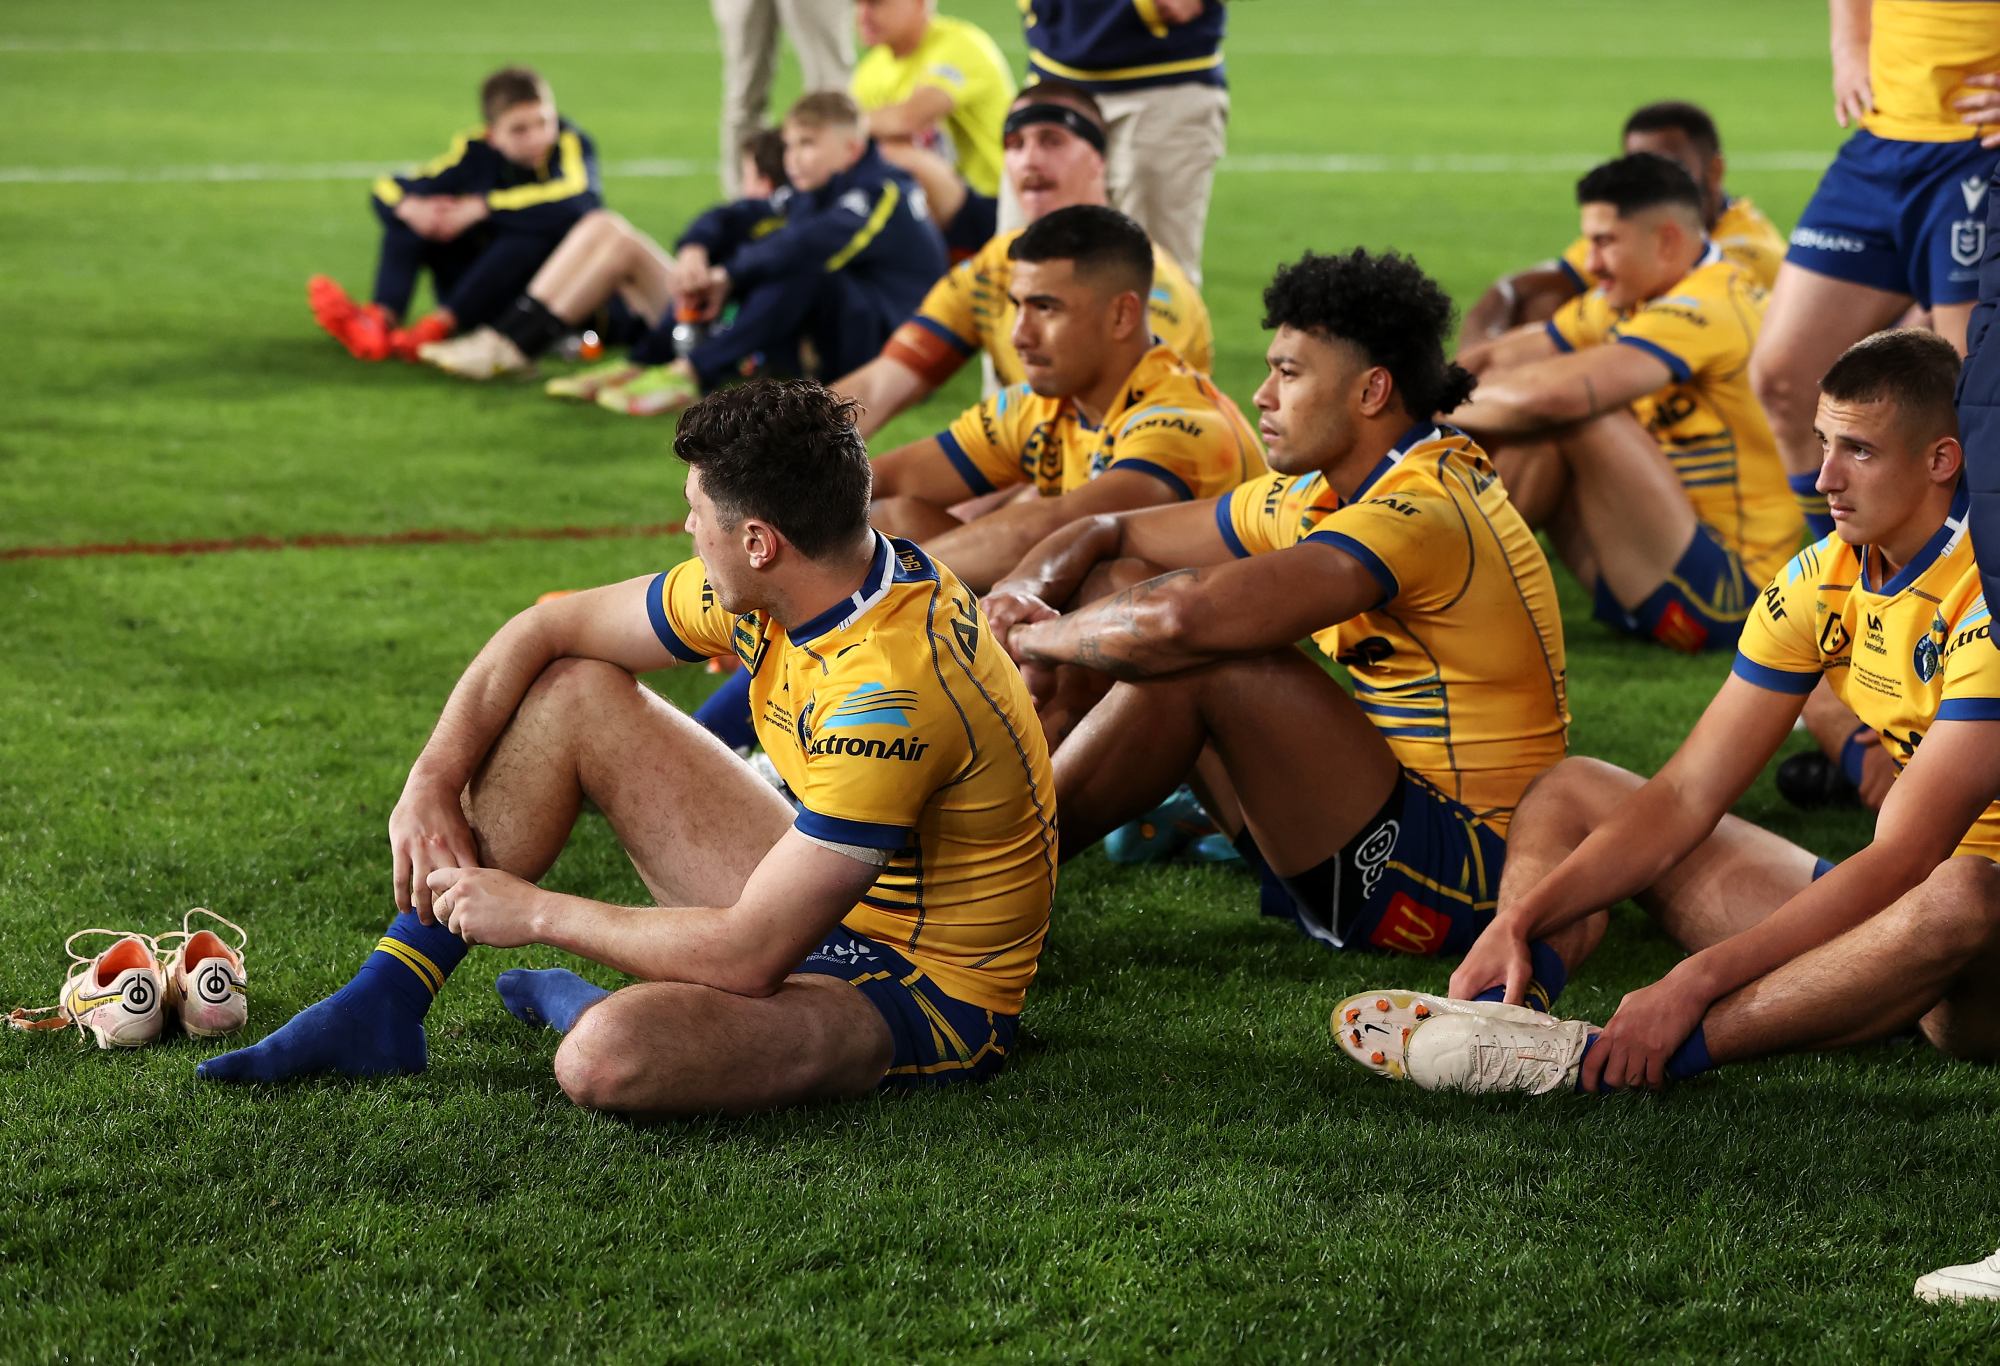 SYDNEY, AUSTRALIA - OCTOBER 02:  The Eels look dejected after defeat in the 2022 NRL Grand Final match between the Penrith Panthers and the Parramatta Eels at Accor Stadium on October 02, 2022, in Sydney, Australia. (Photo by Mark Kolbe/Getty Images)